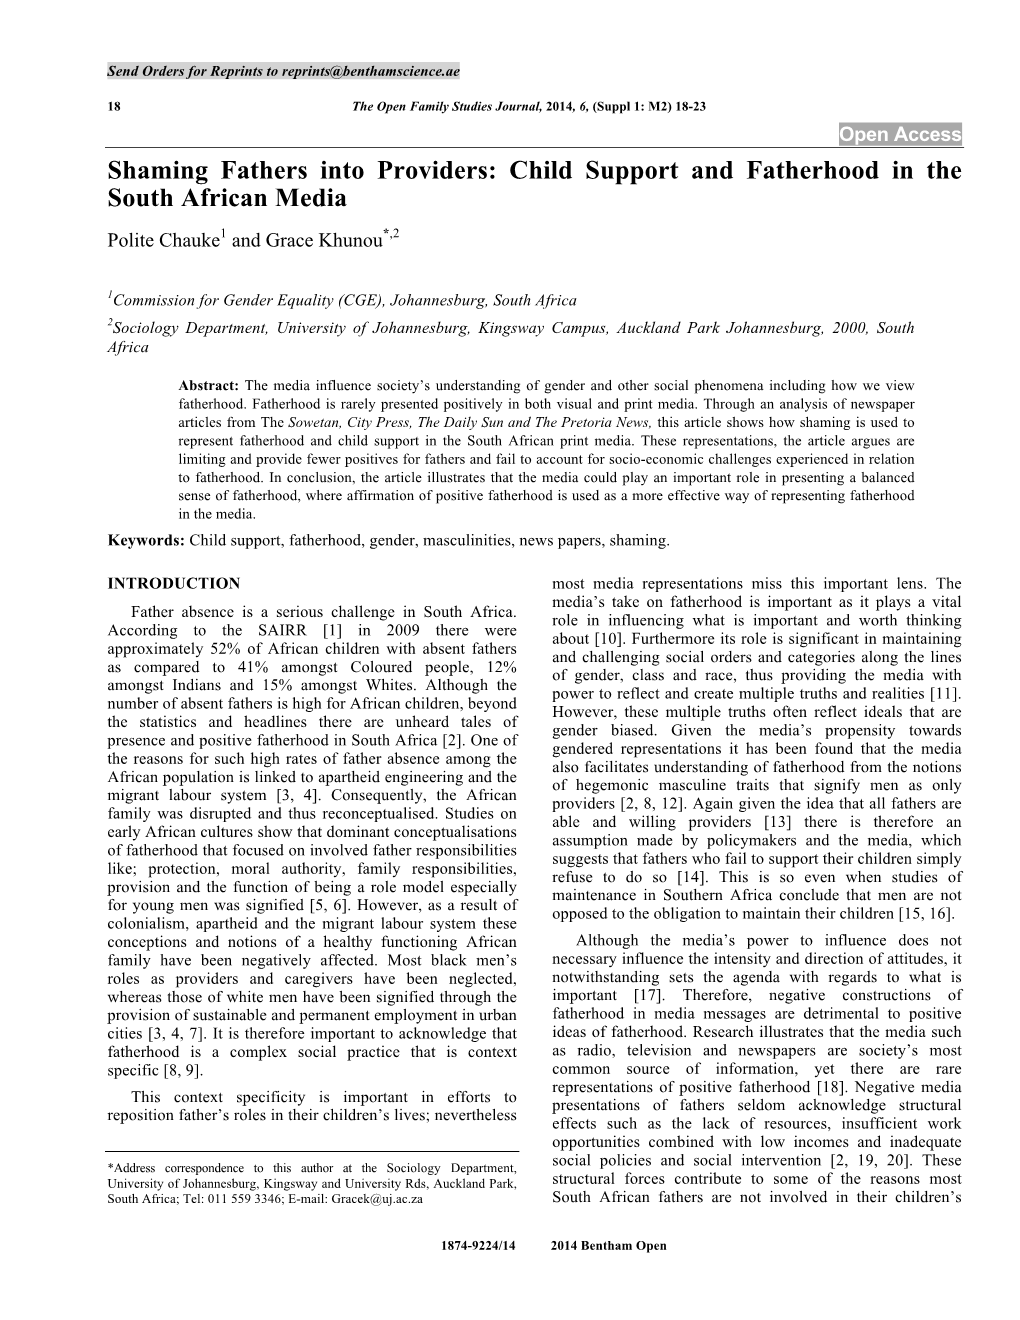 Child Support and Fatherhood in the South African Media Polite Chauke1 and Grace Khunou*,2